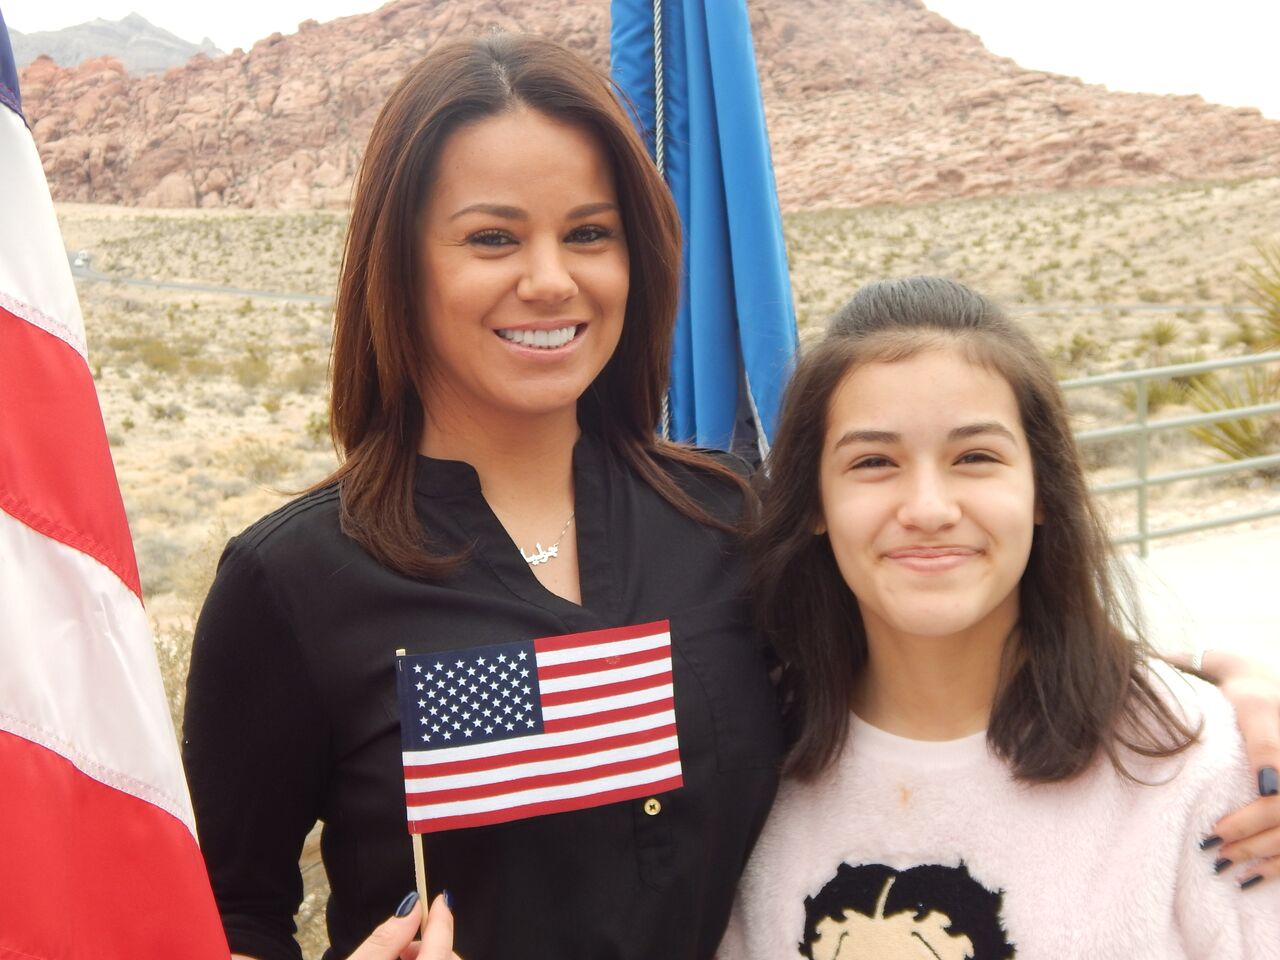 Becoming a U.S. Citizen with the Calico Hills as Backdrop